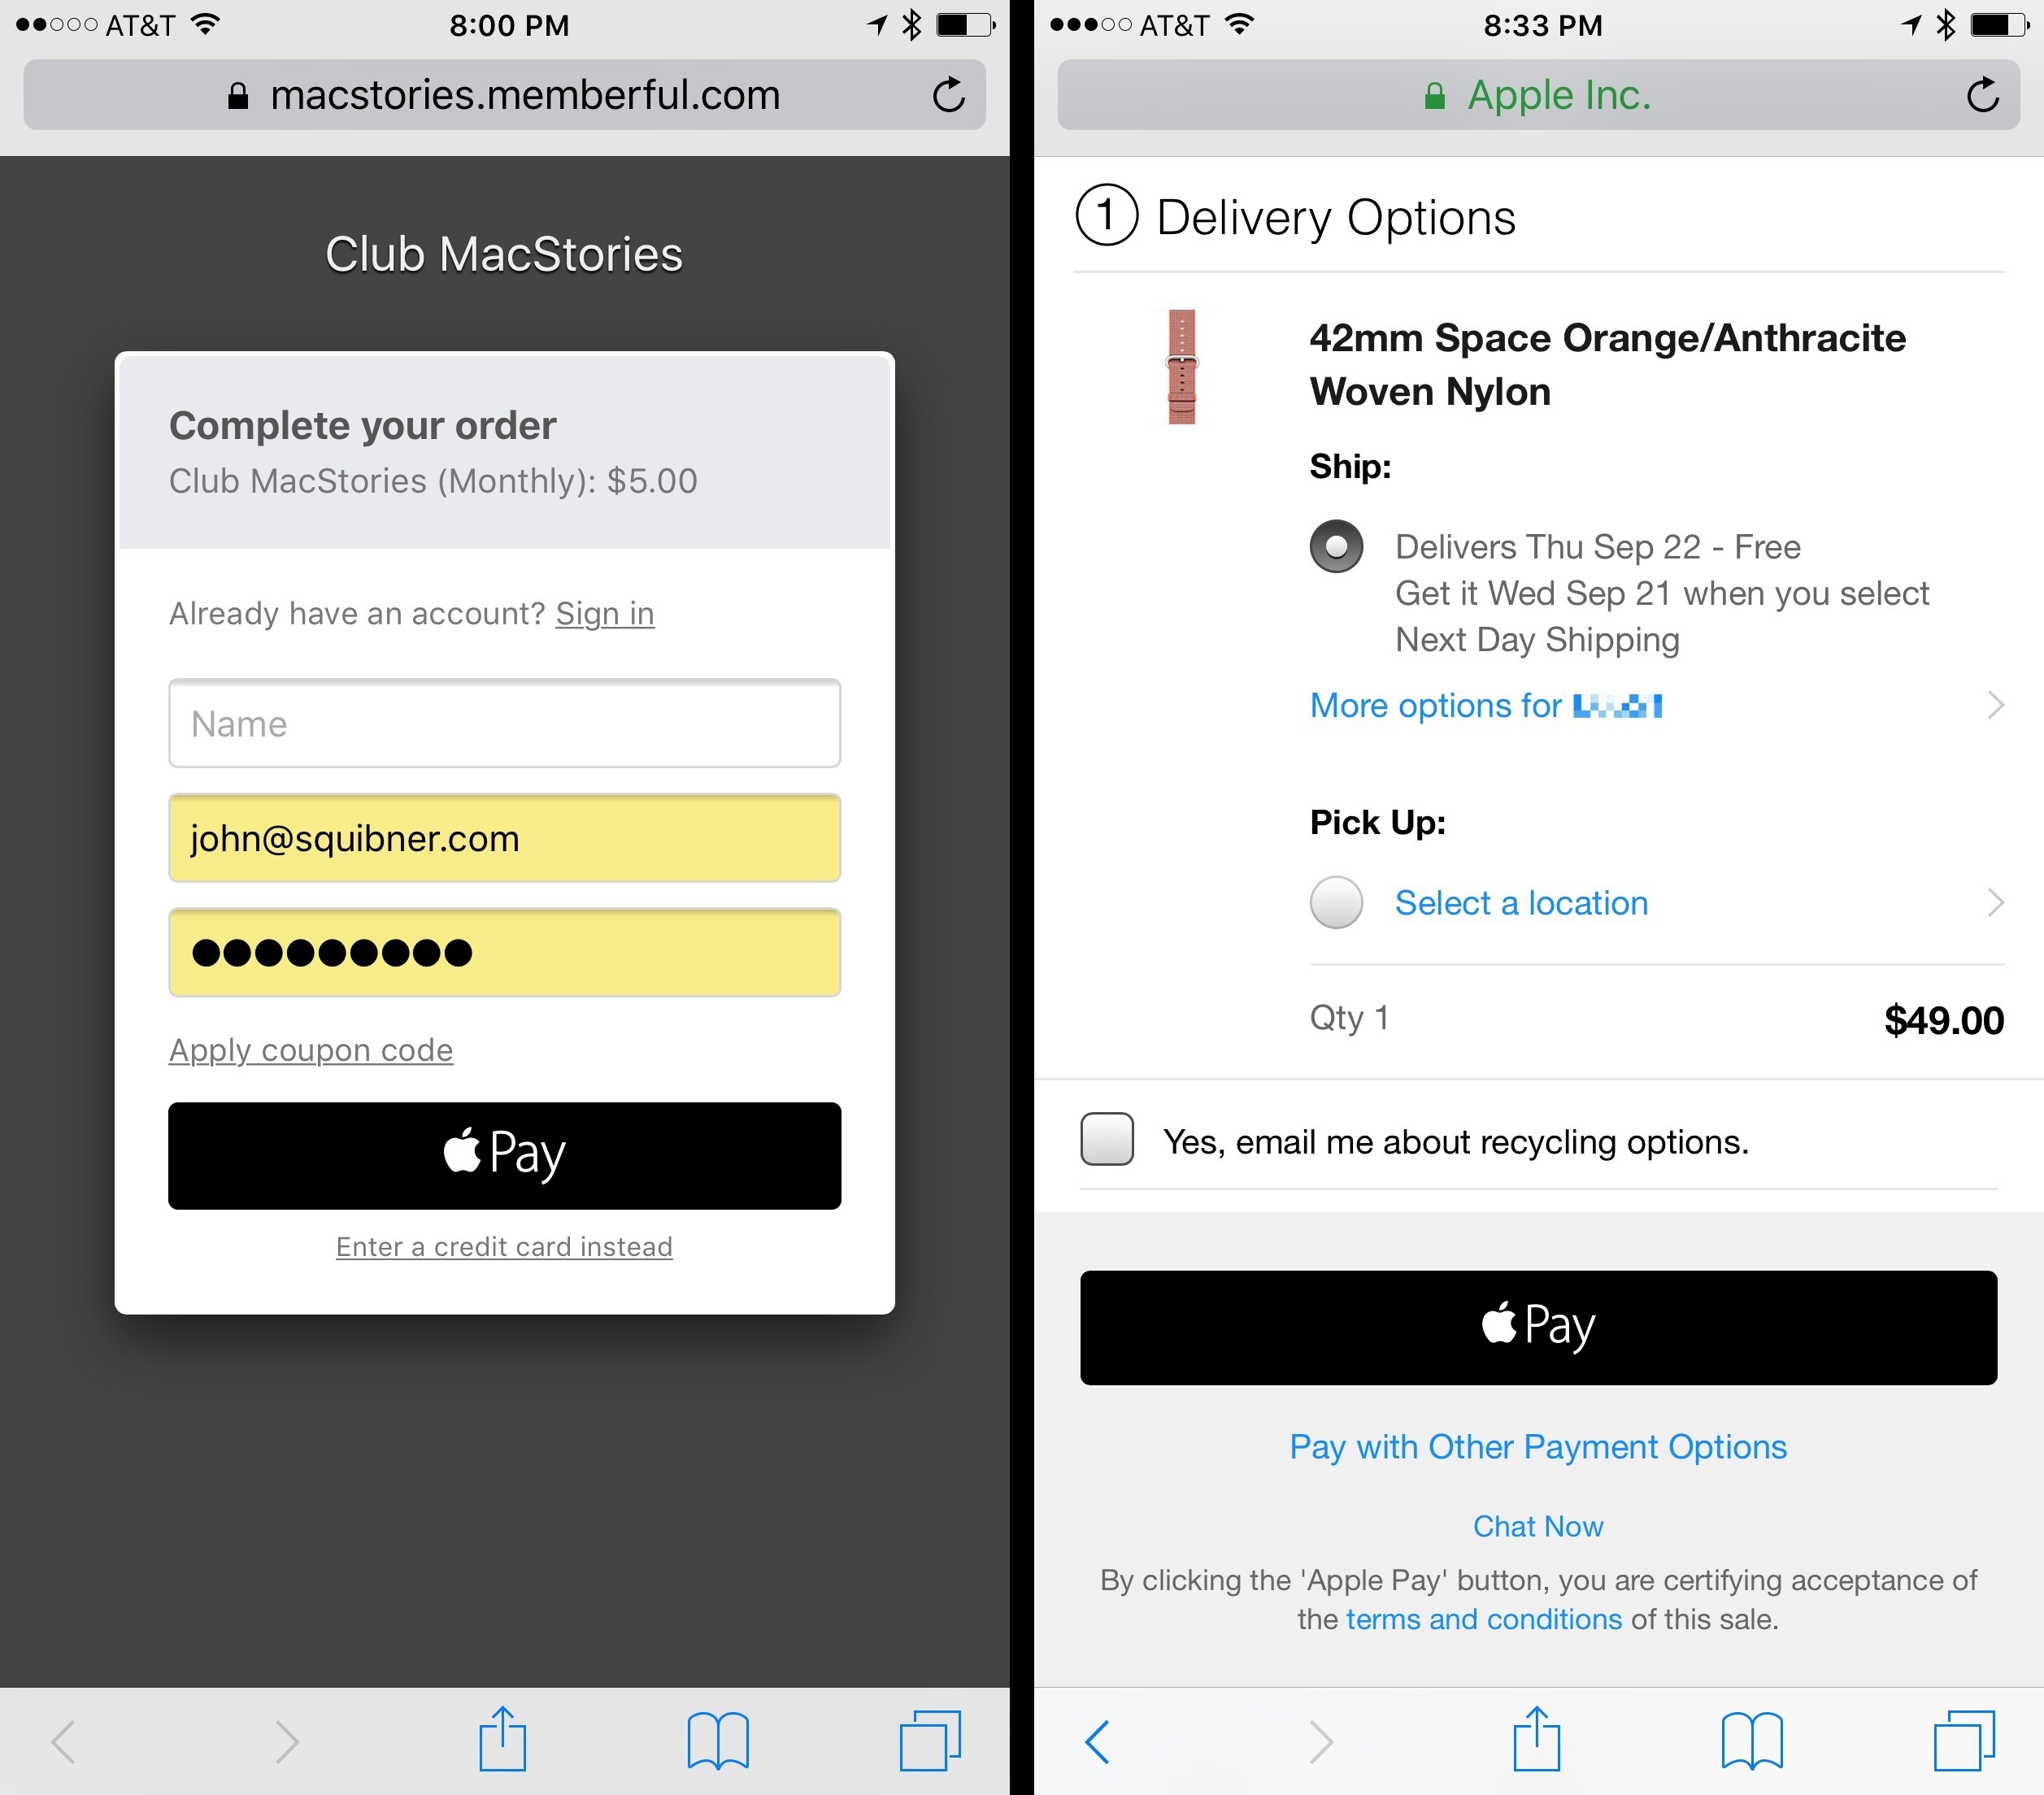 Apple Pay transactions can be authorized on iOS inside Safari using Touch ID.